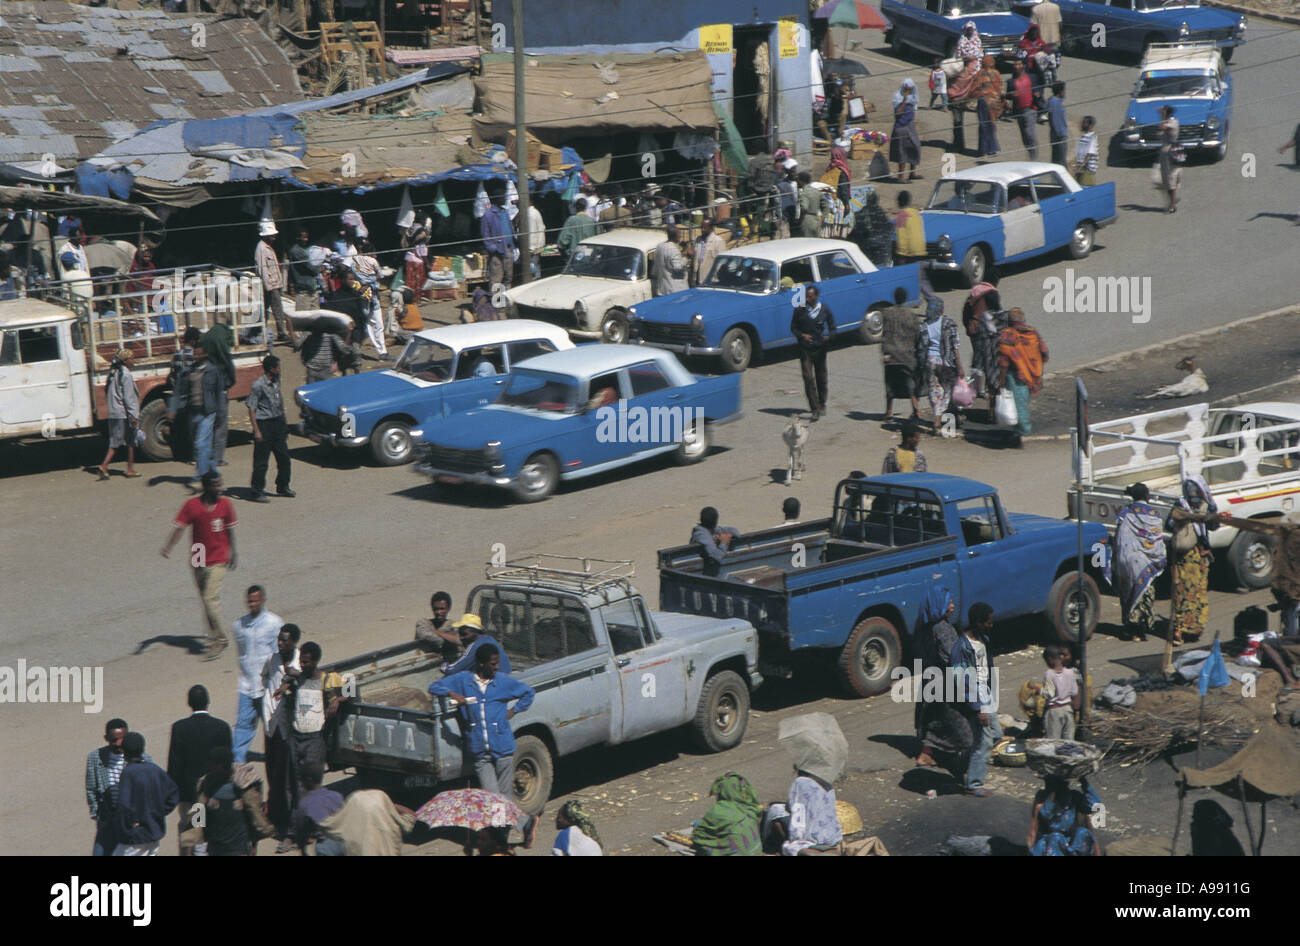 Market day with traditional blue and white taxis Harer Ethiopia Stock Photo